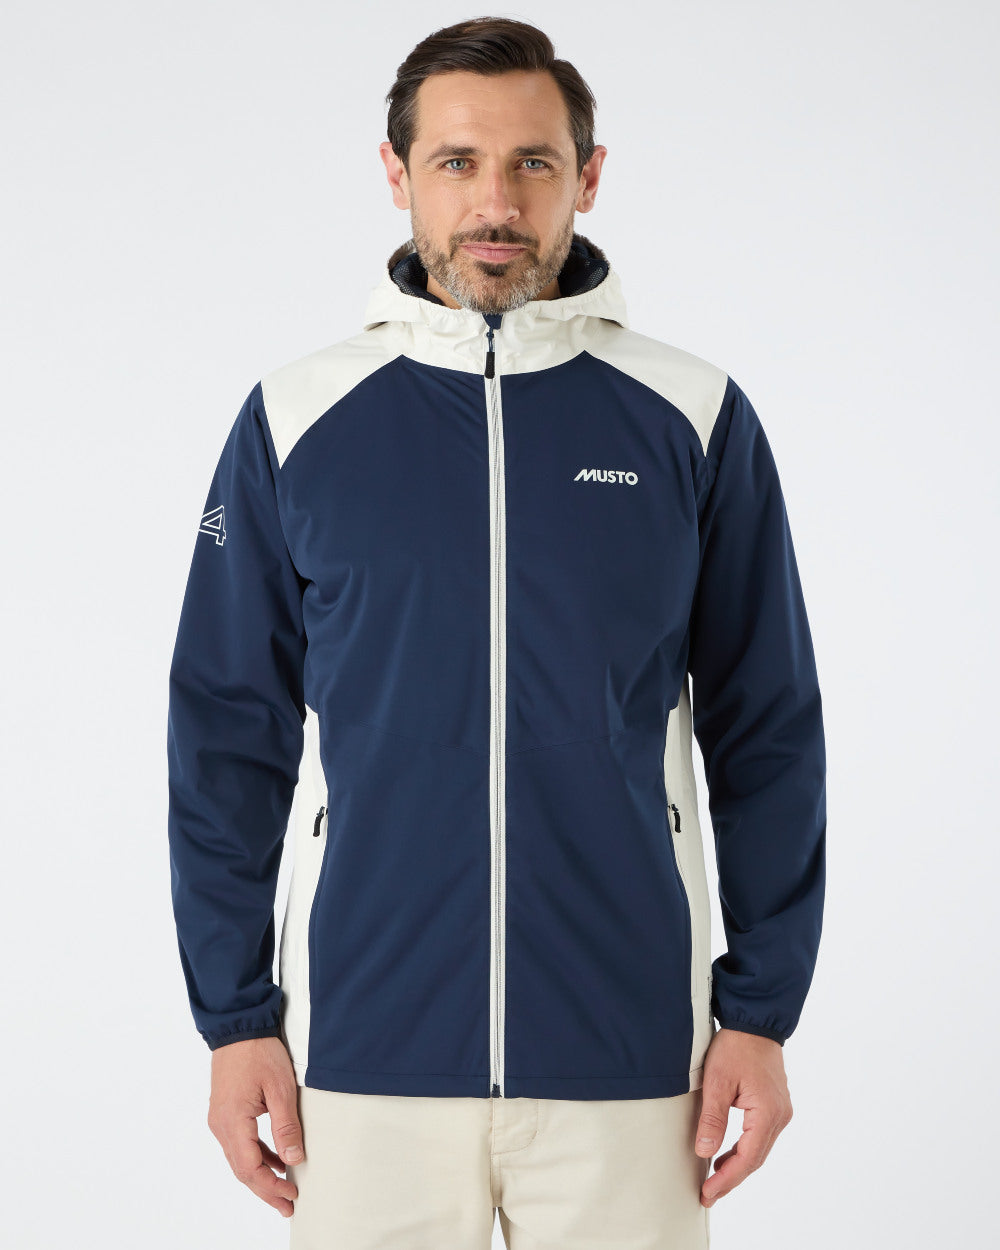 Navy/Asw Coloured Musto Mens 64 Active Waterproof Jacket On A Grey Background 